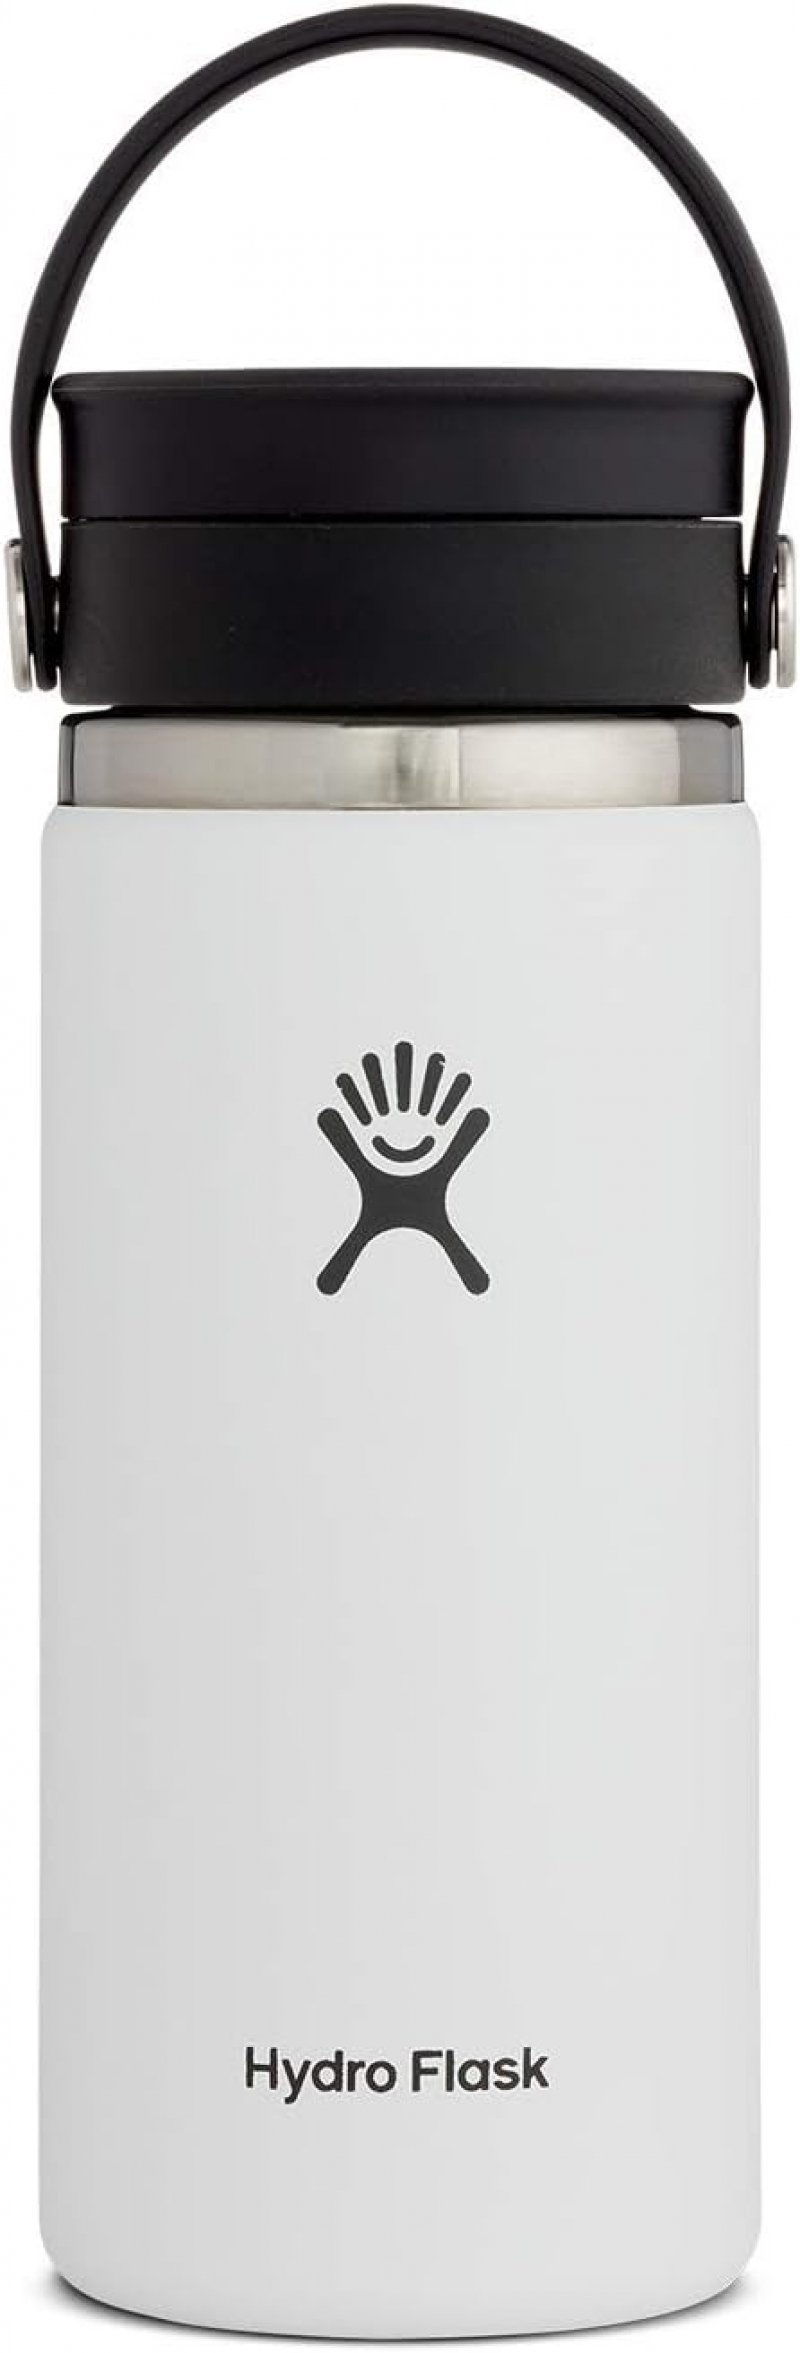 ihocon: Hydro Flask Stainless Steel Wide Mouth Bottle with Flex Sip Lid and Double-Wall Vacuum Insulation for Coffee, Tea and Drinks  16 oz, 不銹鋼廣口保溫水瓶